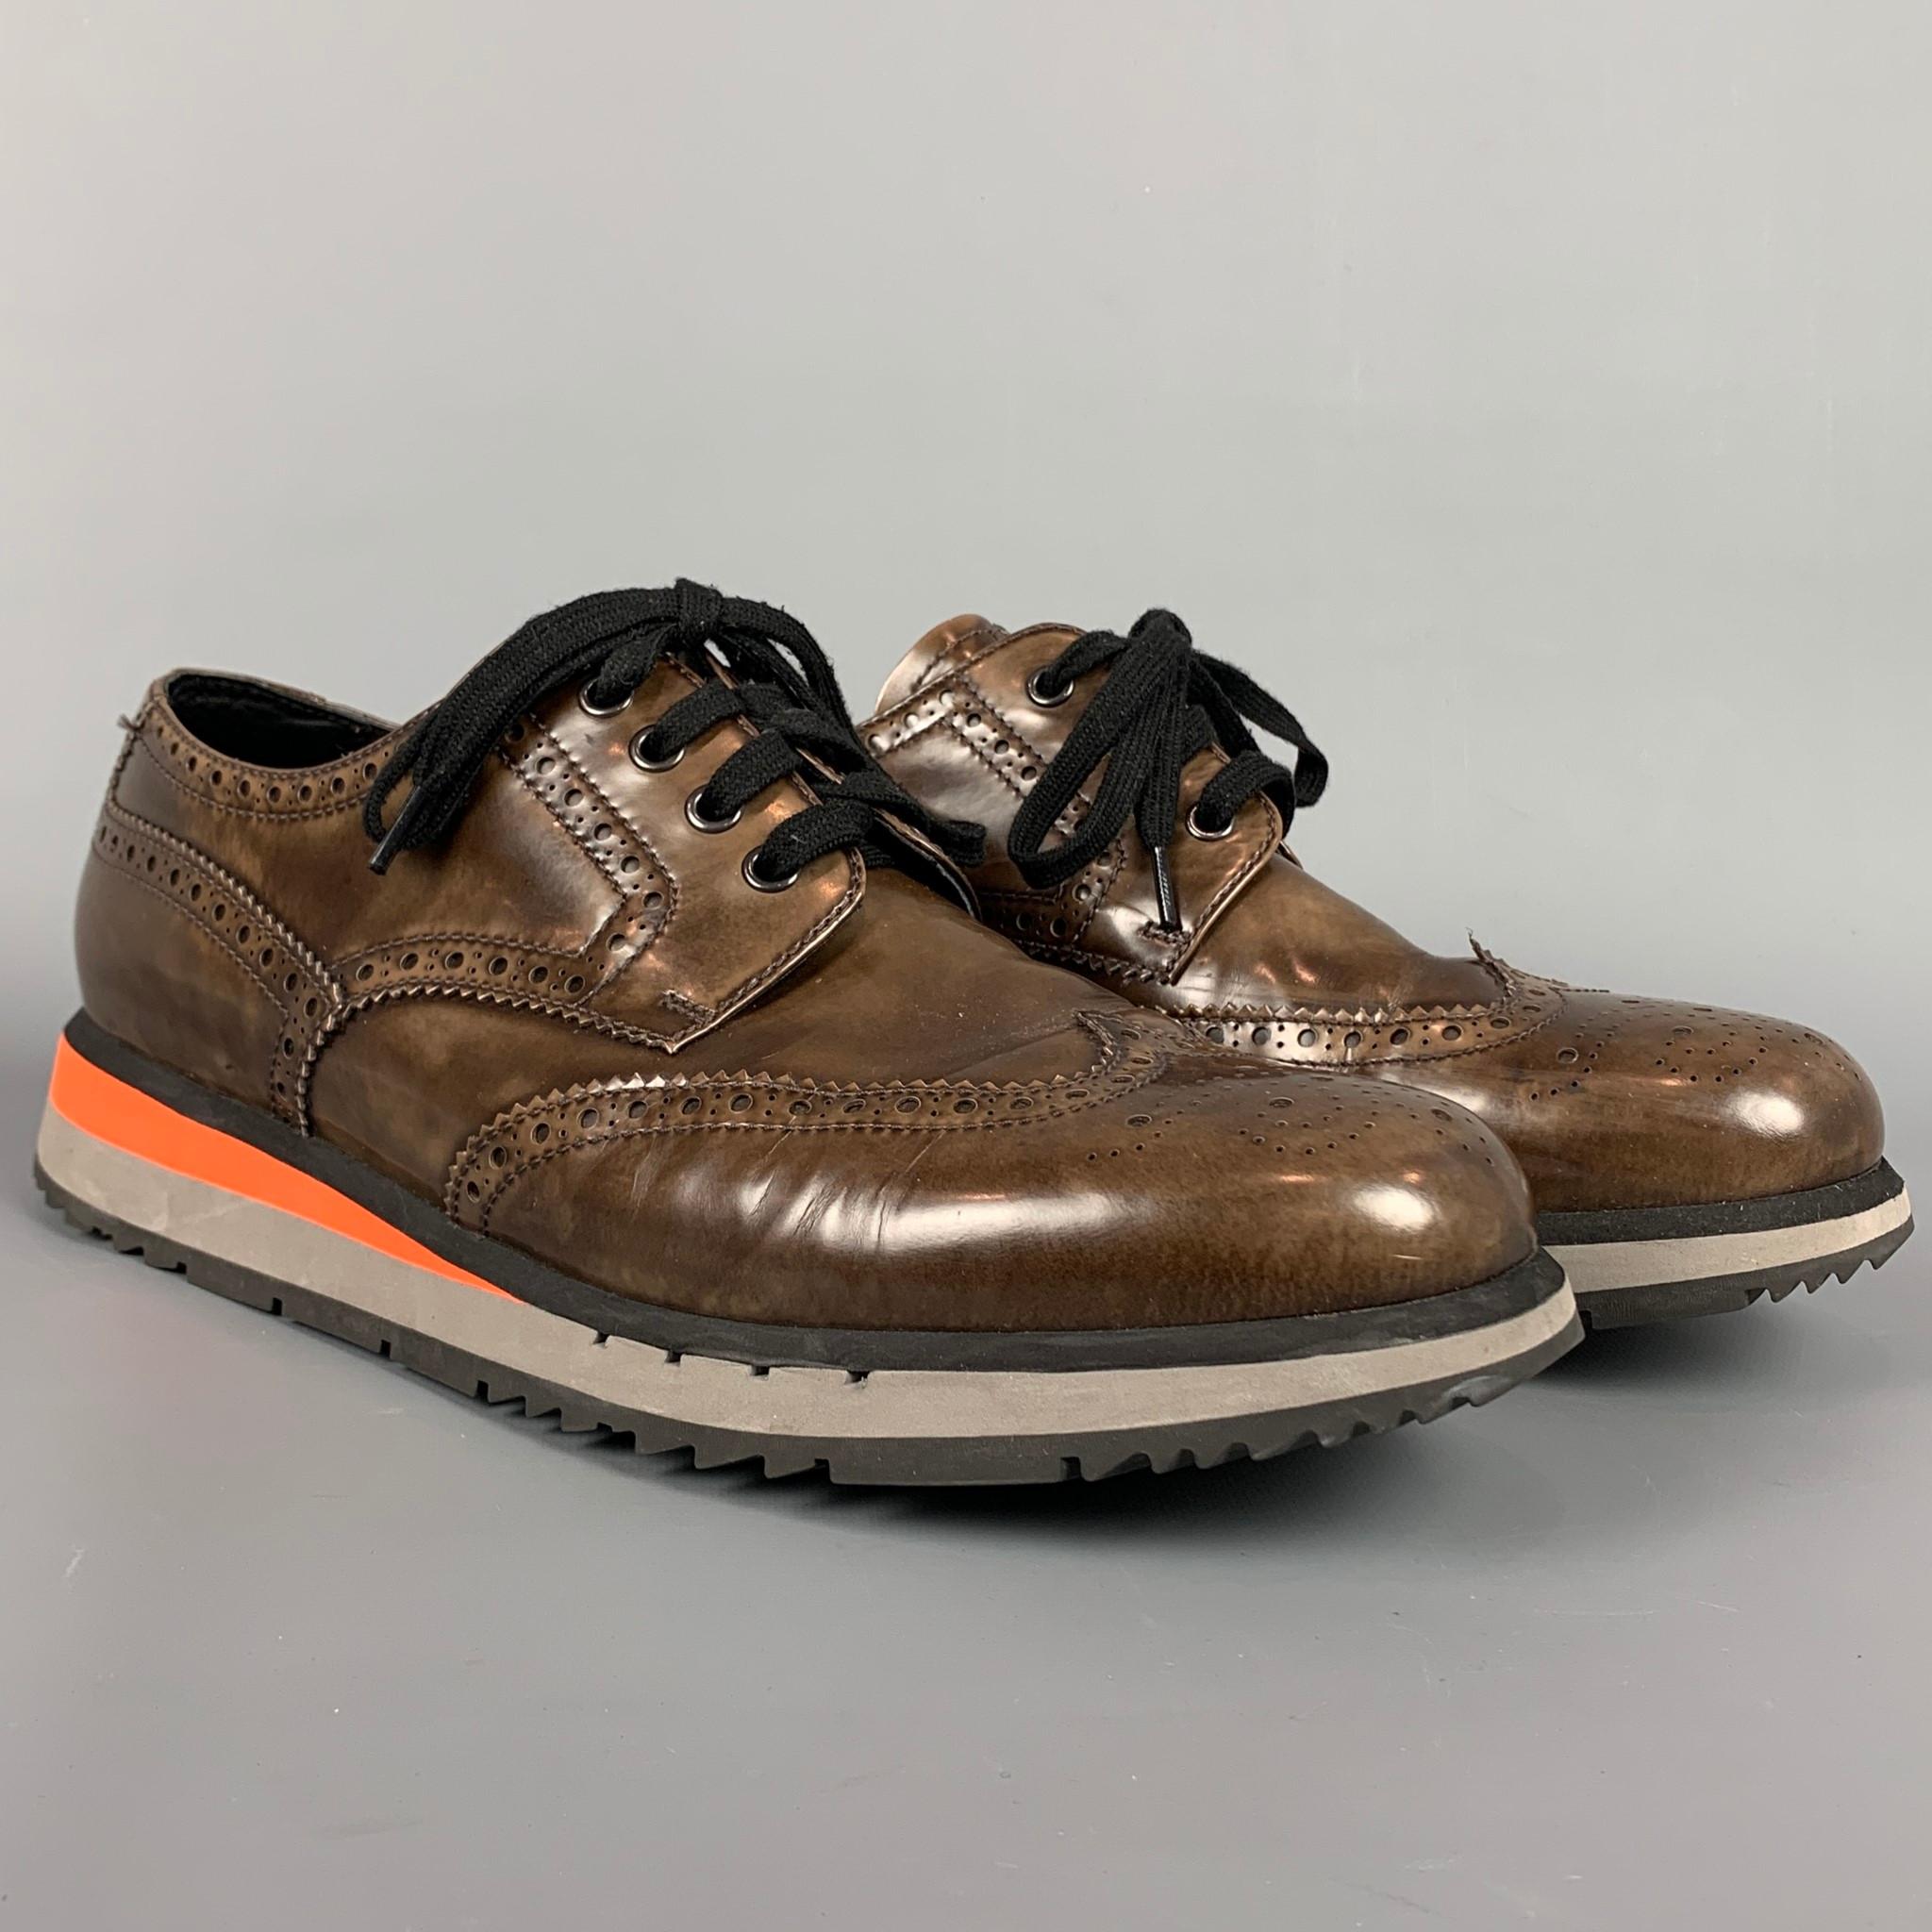 PRADA shoes comes in a brown perforated leather featuring a wingtip style, rubber sole, and a lace up closure. Includes box. 

Very Good Pre-Owned Condition.
Marked: 4E2339 11
Original Retail Price: $580.00

Outsole: 12.5 in. x 4.5 in. 